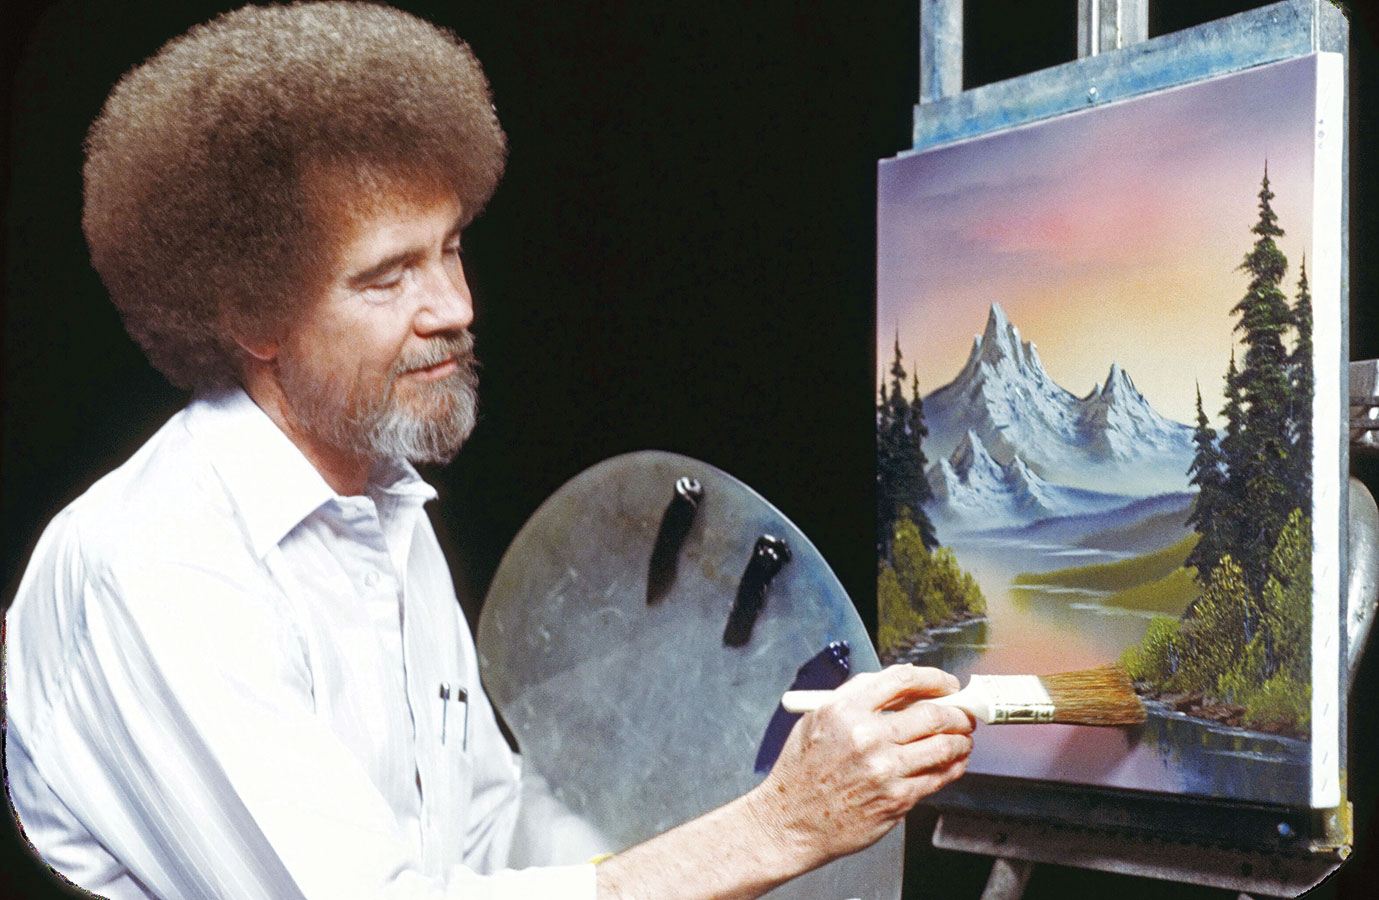 You Can Stream Every Bob Ross Episode For Free on YouTube